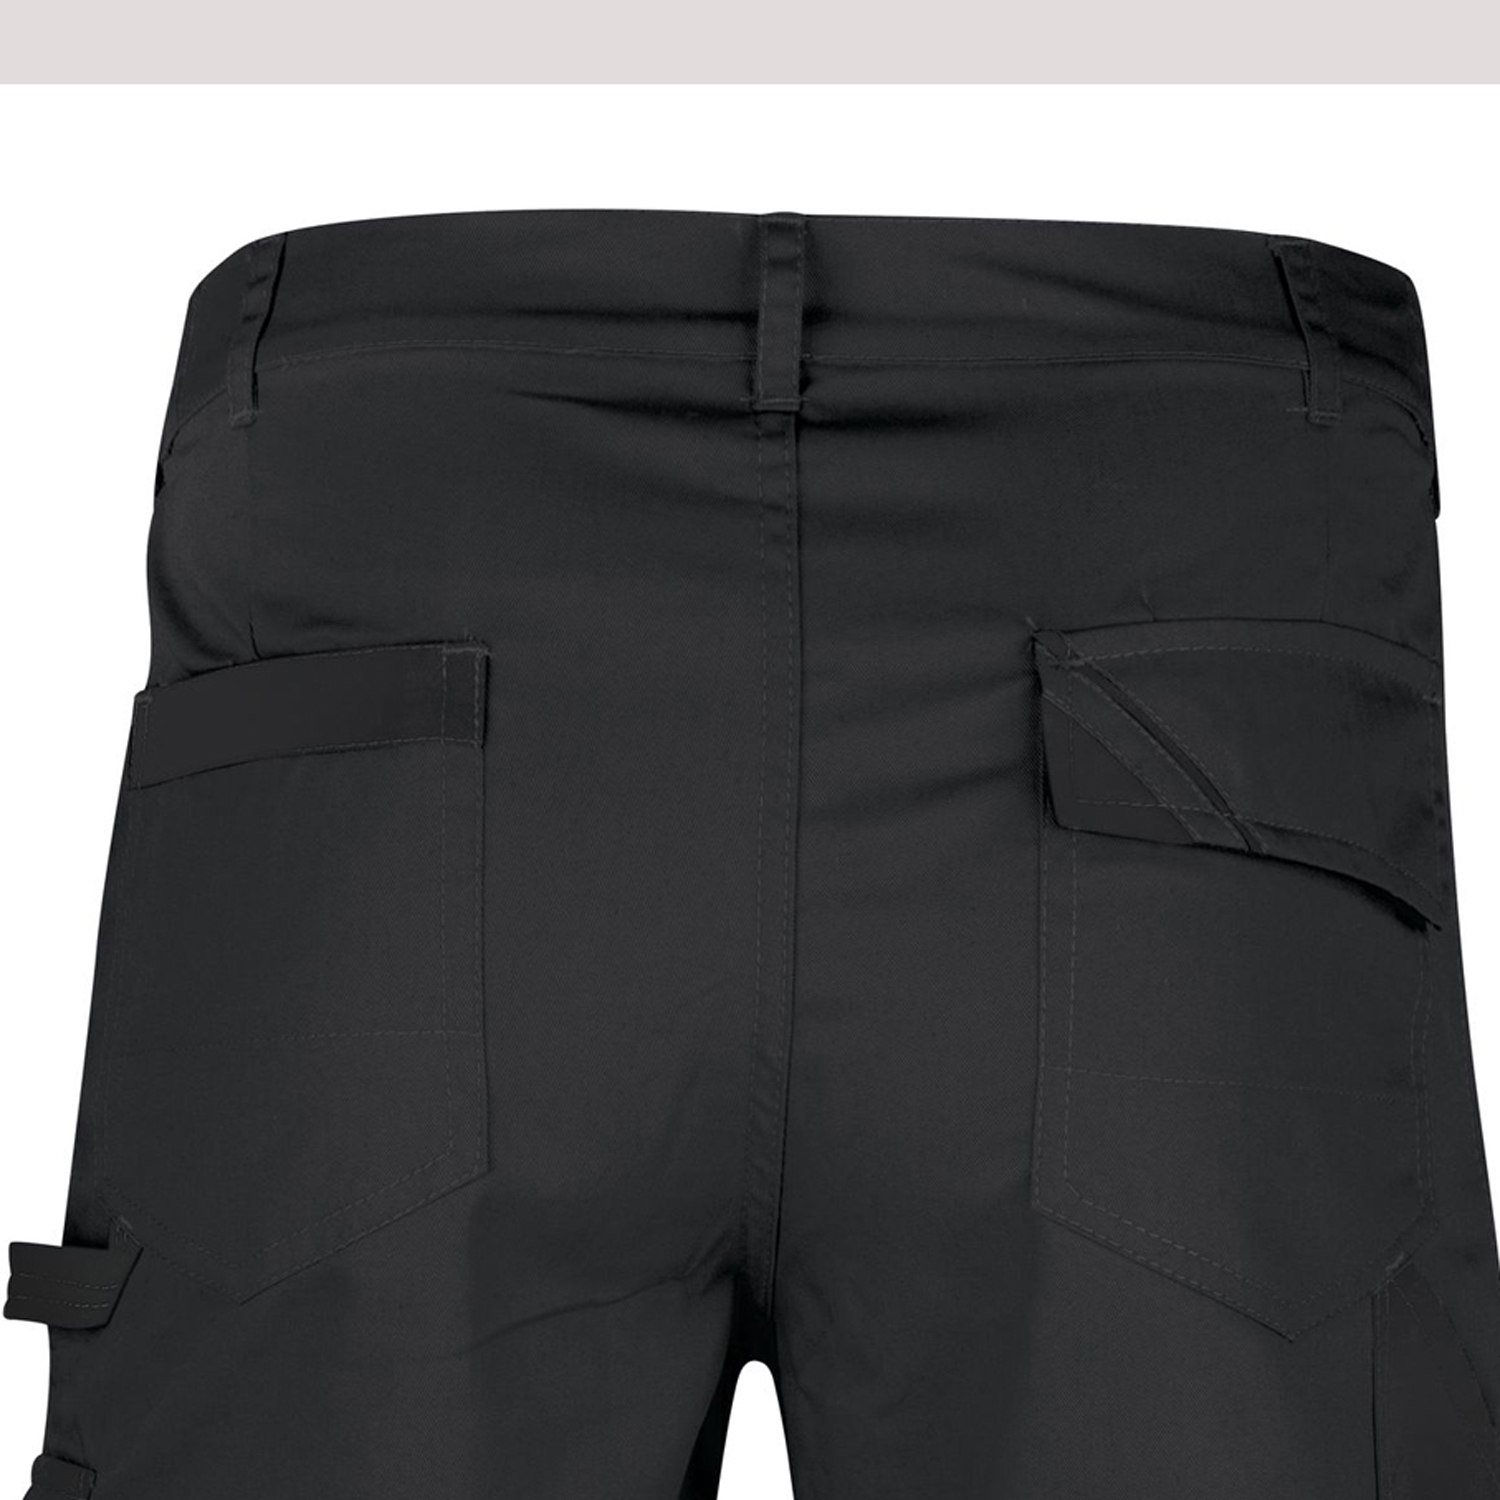 Workingshorts in black by PKA Klöcker, large sizes up to 66